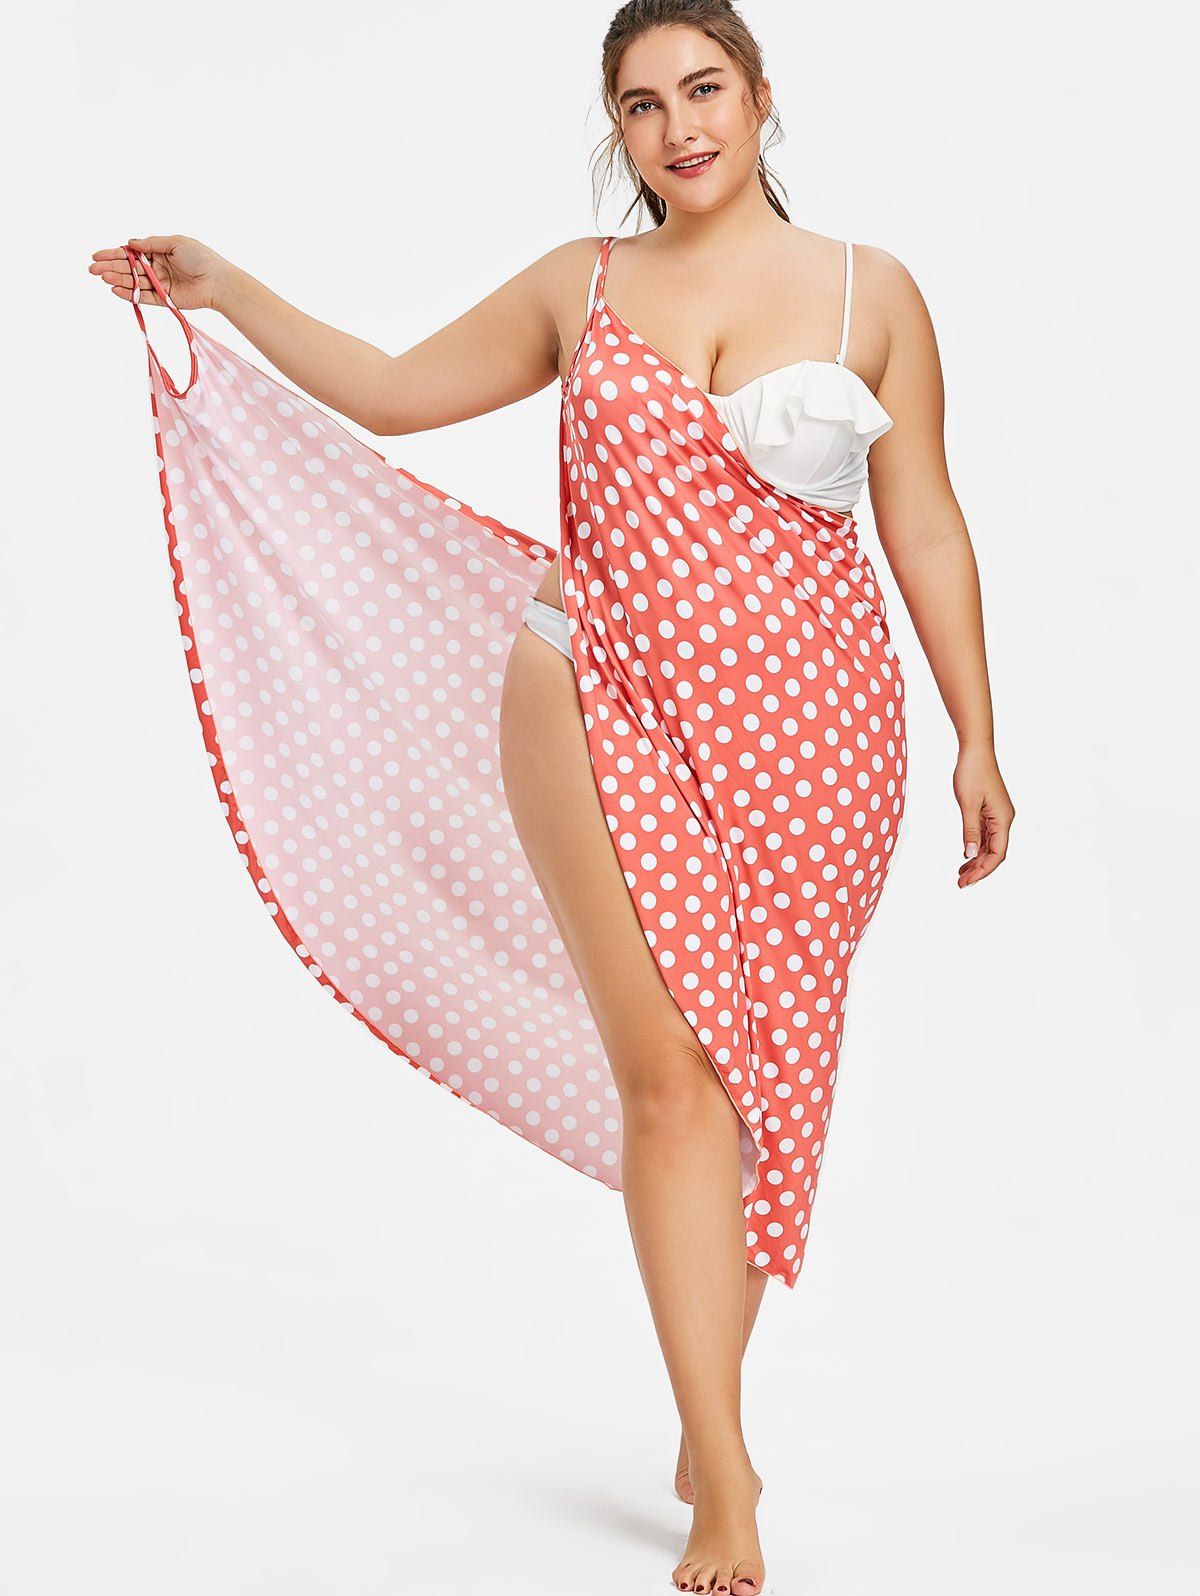 Best Plus Size Polka Dot Convertible Cover Up Dressdresses for plus size people  ROSEGAL DRESSES FOR EVERY WOMAN